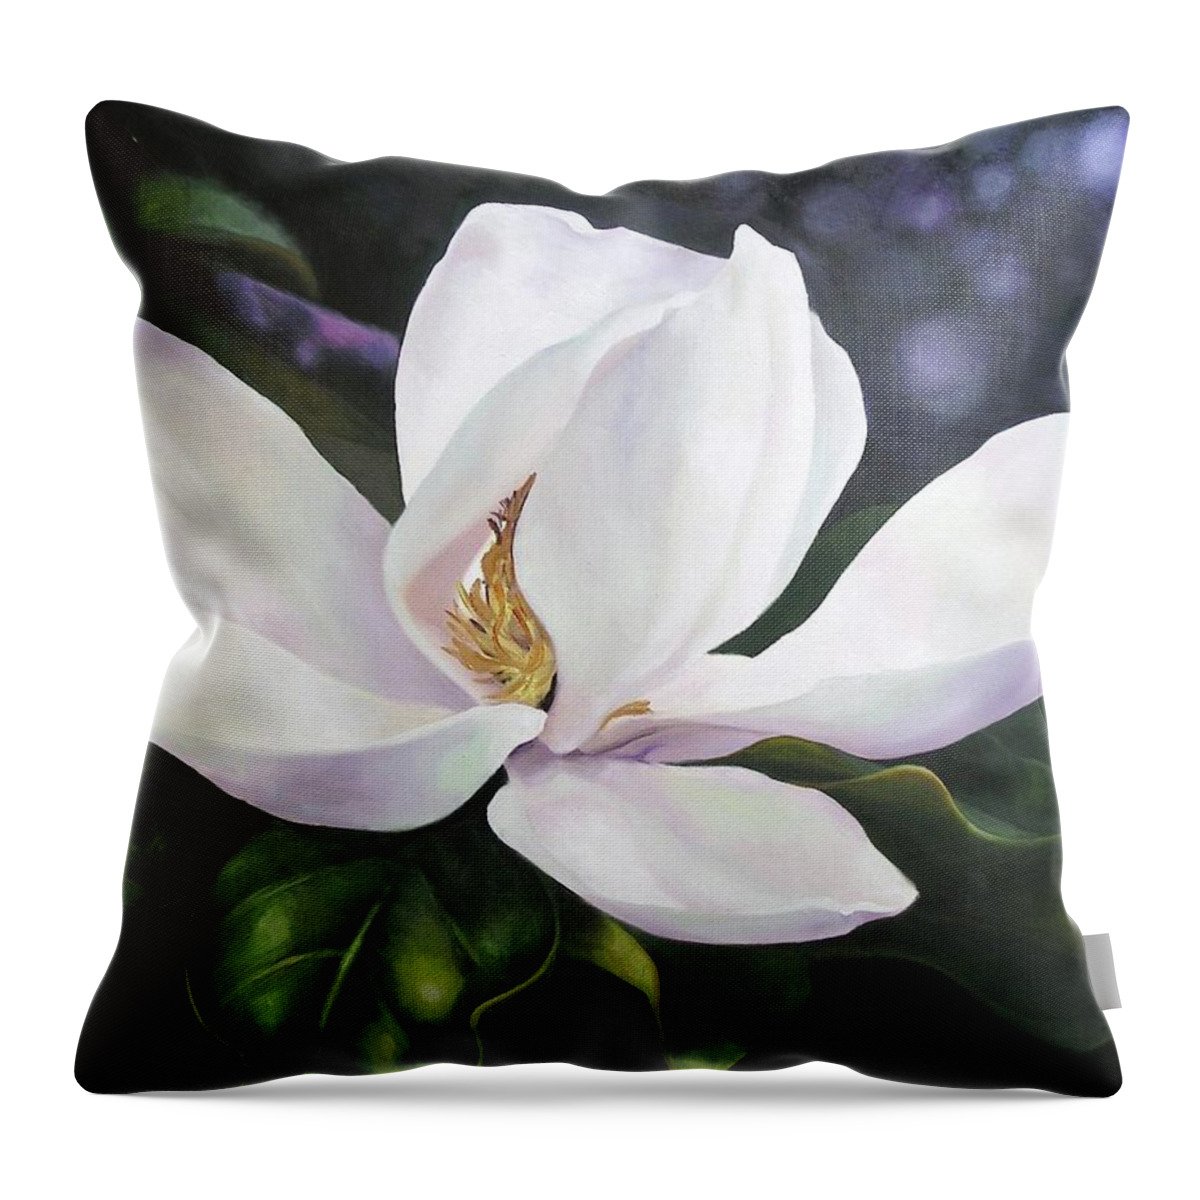 Flower Throw Pillow featuring the painting Magnolia Flower by Chris Hobel